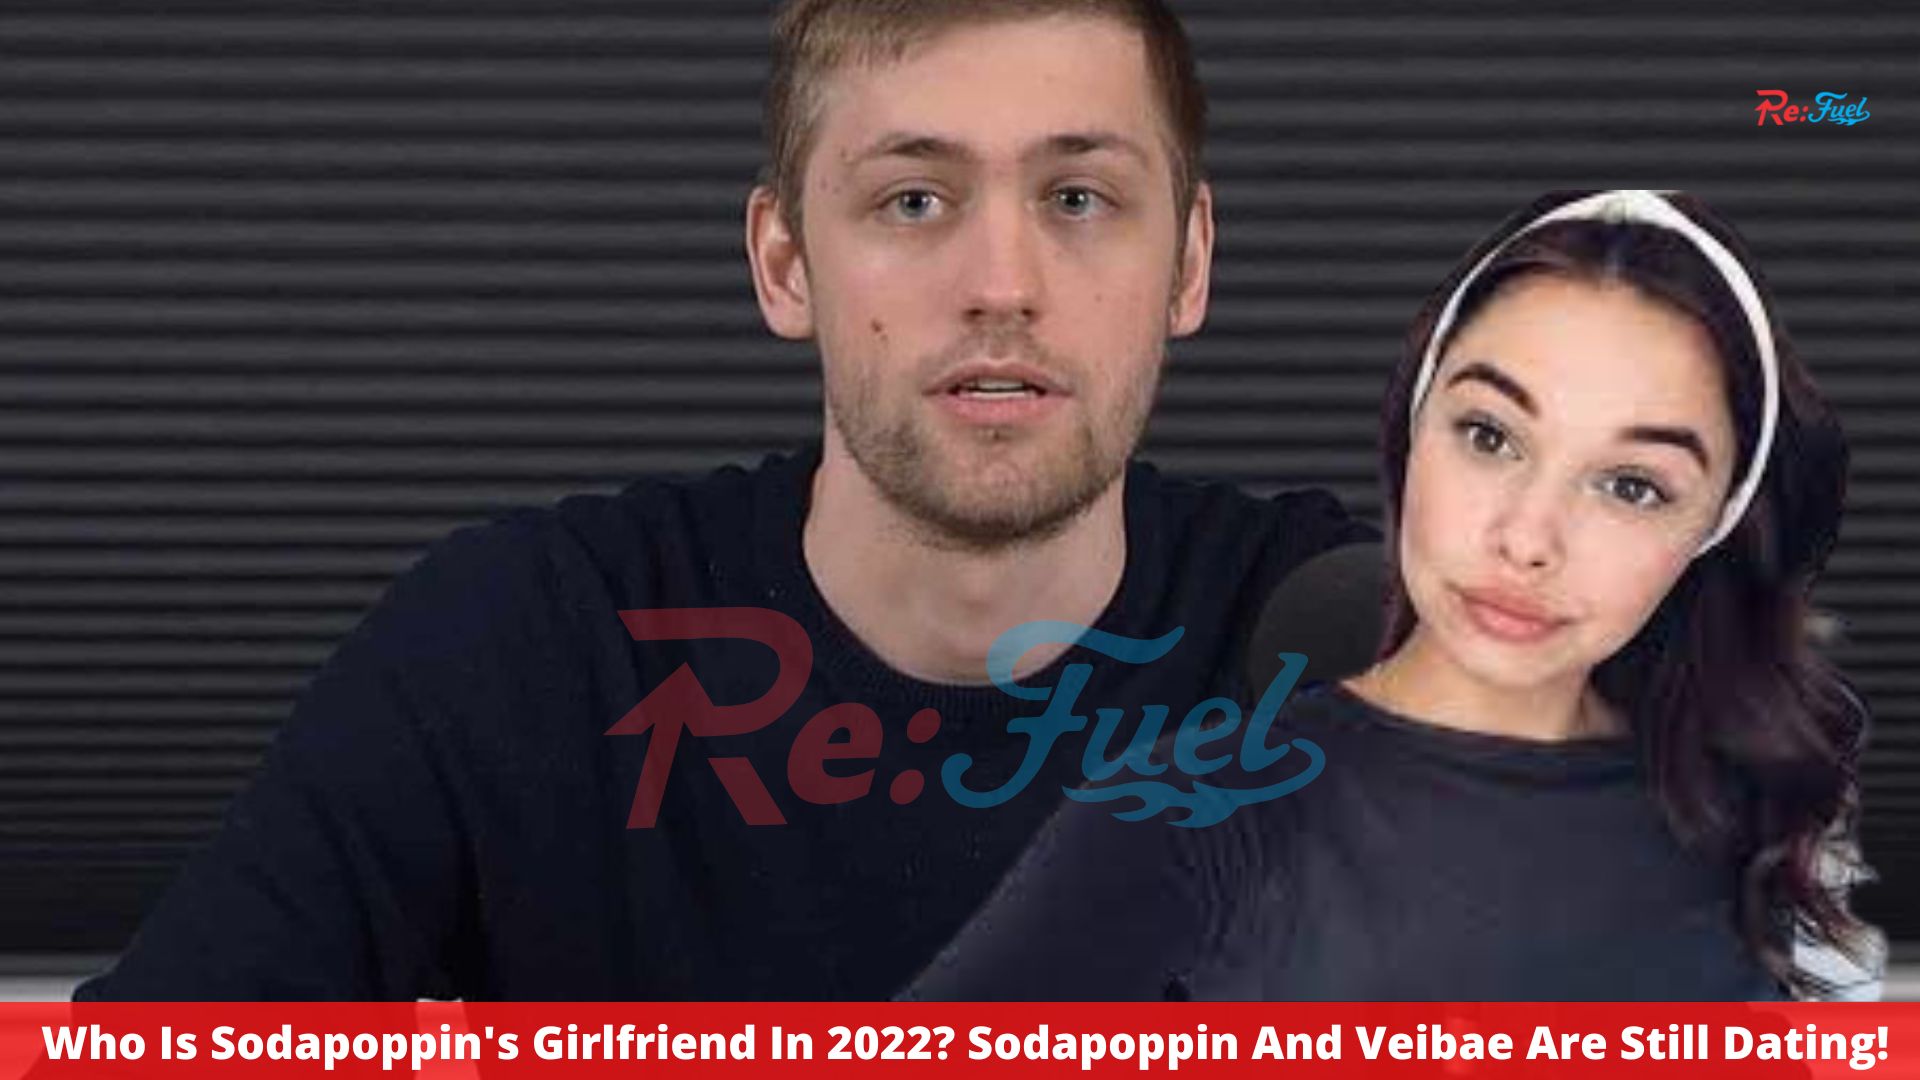 Who Is Sodapoppin's Girlfriend In 2022? Sodapoppin And Veibae Are Still Dating!